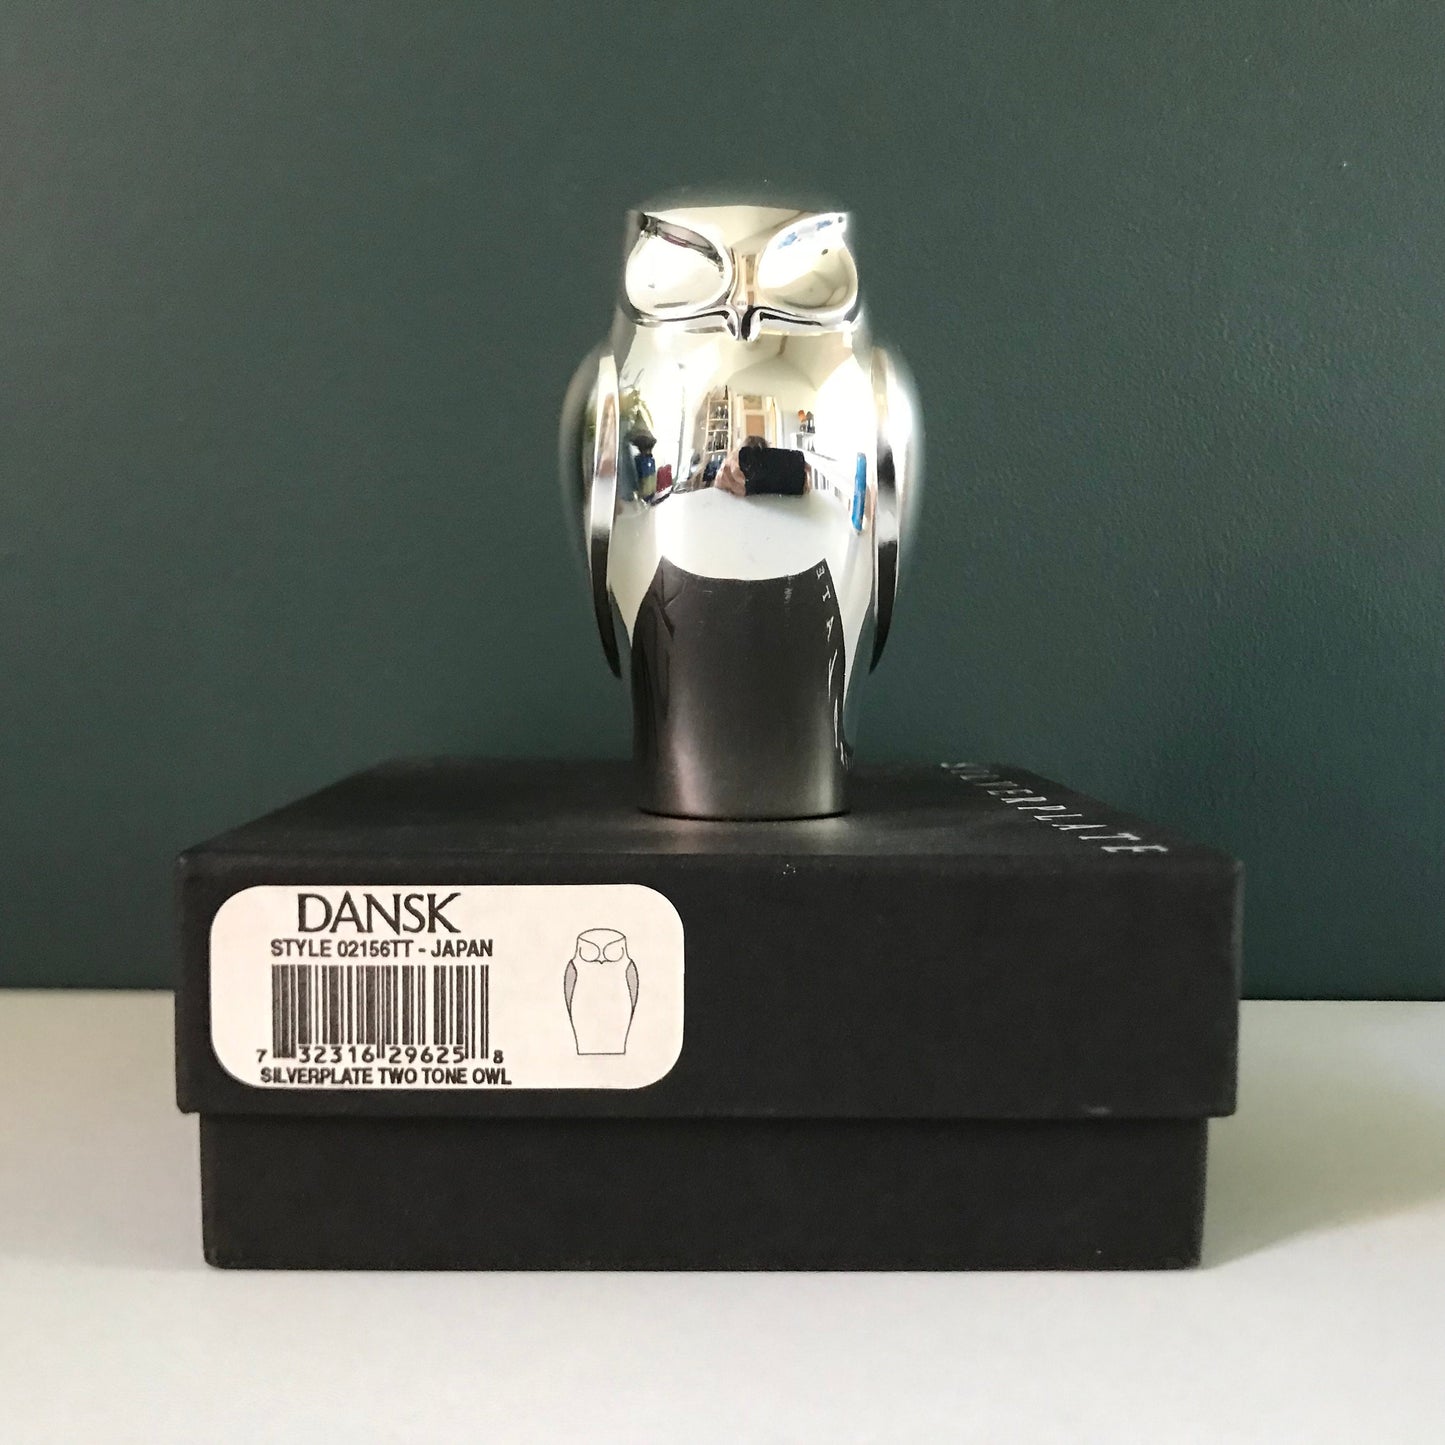 BOXED Dansk Designs Owl Silver Paperweight Danish Mens Fathers Day Dads Gifts Presents Retro